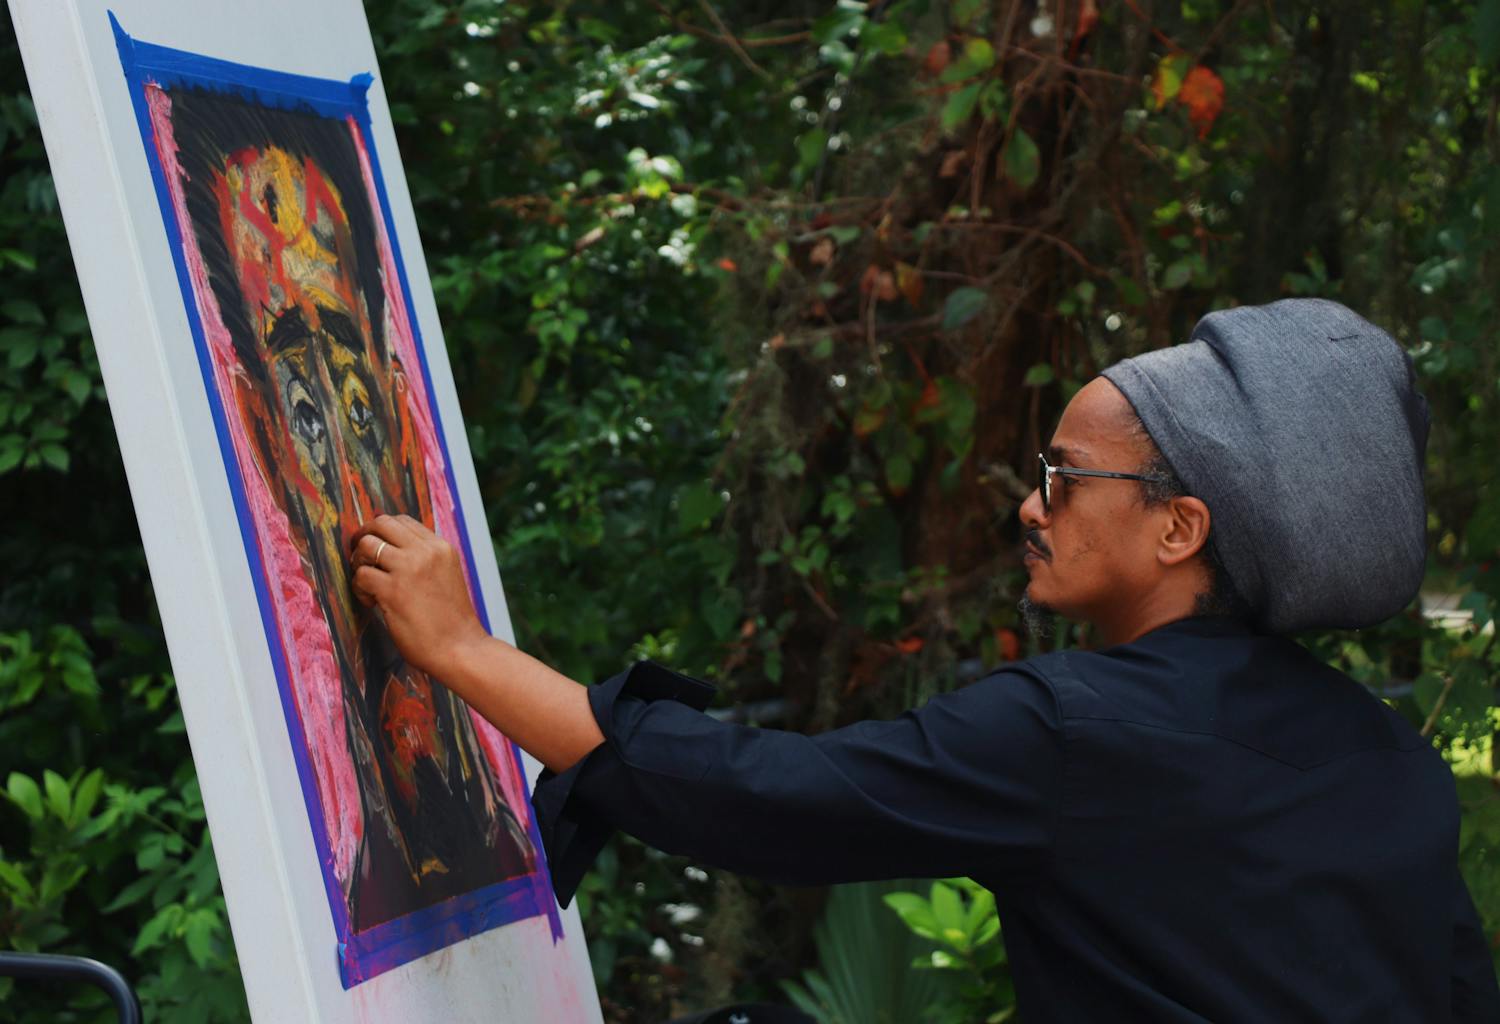 Prince Merid Tafesse of Ethiopia, 47, draws a live sketch of Haile Selassie, a former Ethiopian emperor, with pastels at the A. Quinn Jones Museum &amp; Cultural Center on Saturday, Sept. 25, 2021. His exhibition is on display inside of the historic home-turned-museum.